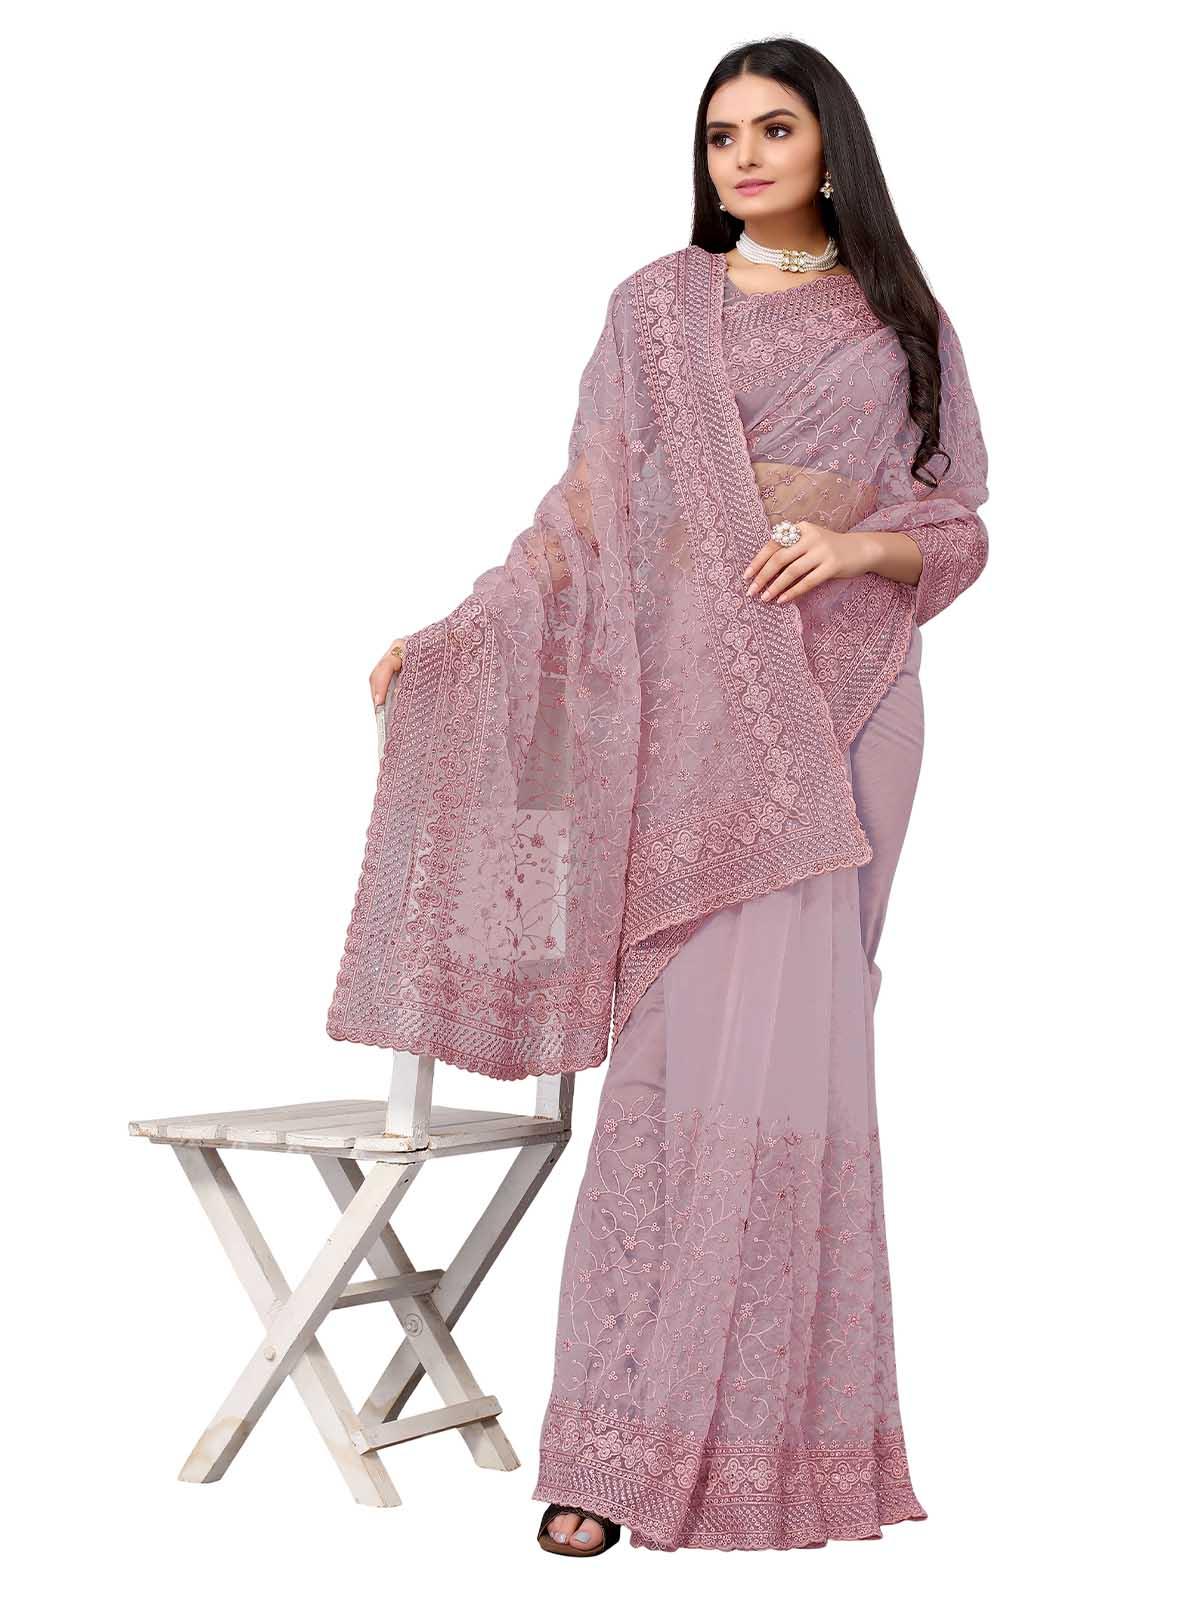 Women's Lilac Net Embroidered Saree With Blouse - Odette